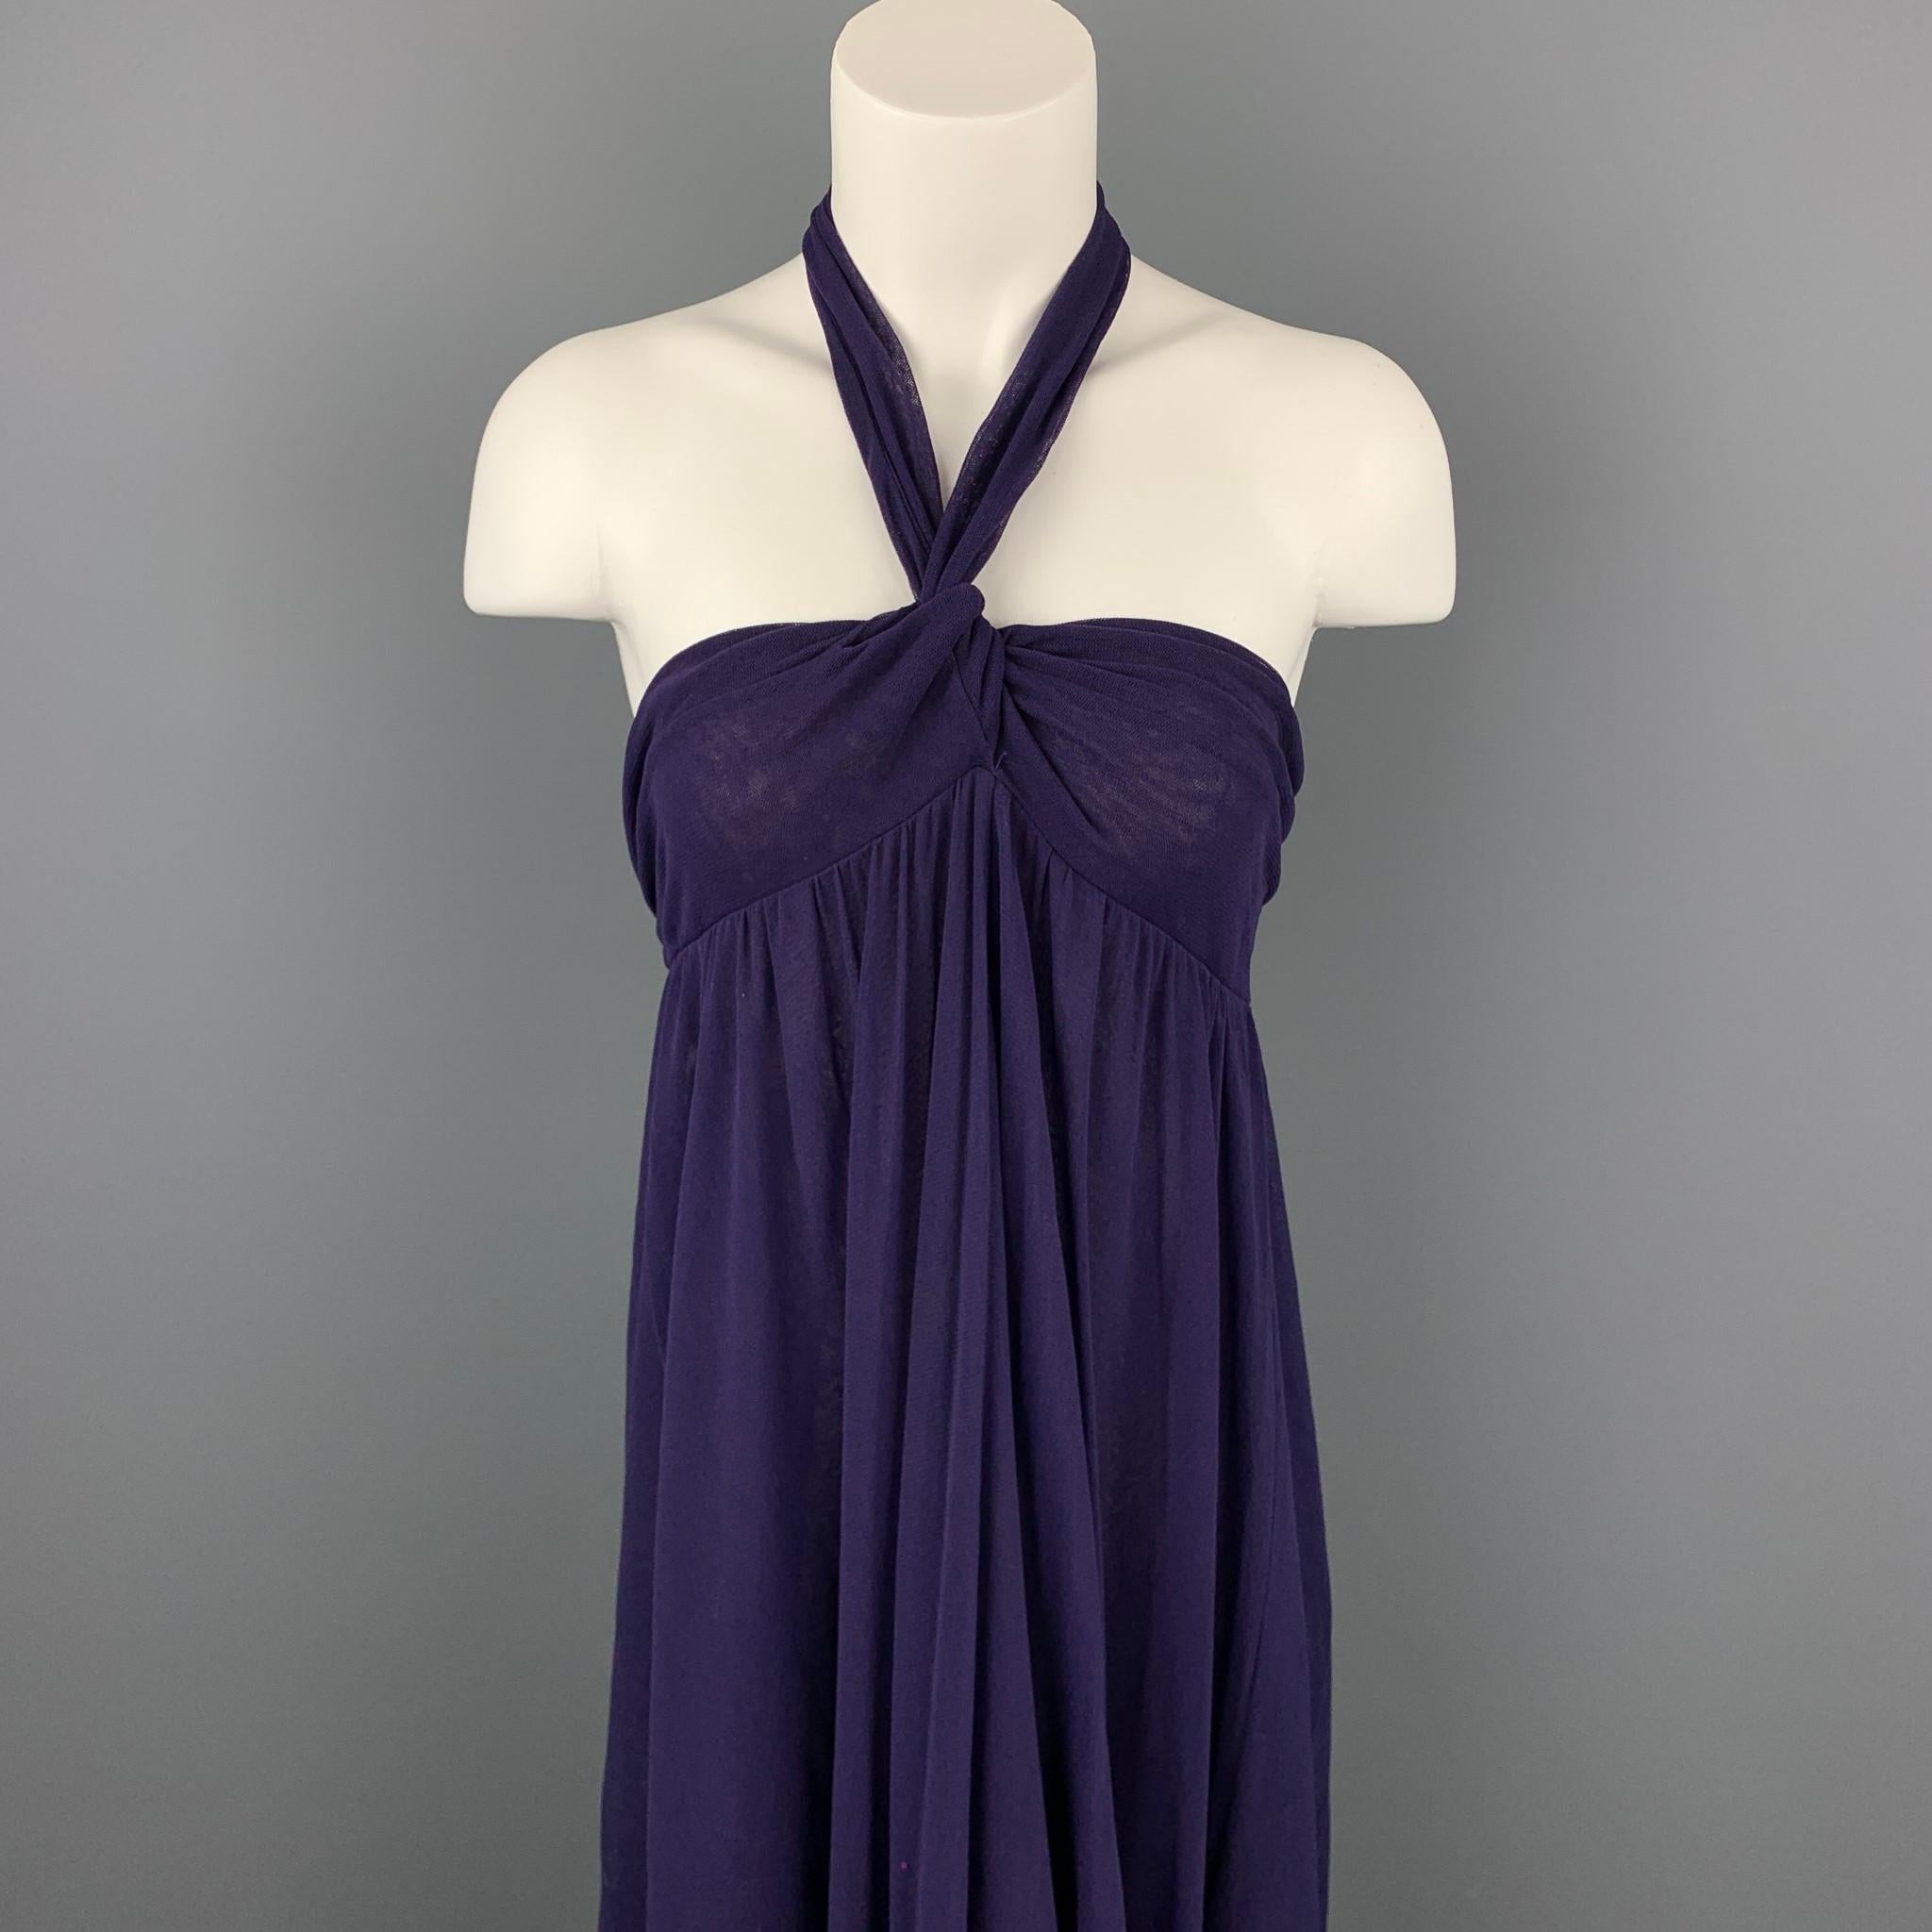 JEAN PAUL GAULTIER cocktail dress comes in a eggplant purple tulle polyamide featuring a halter style, sleeveless, full skirt, and a ruffled hem. Made in Italy.

Good Pre-Owned Condition.
Marked: M

Measurements:

Bust: 30 in.
Hip: 40 in. 
Length: